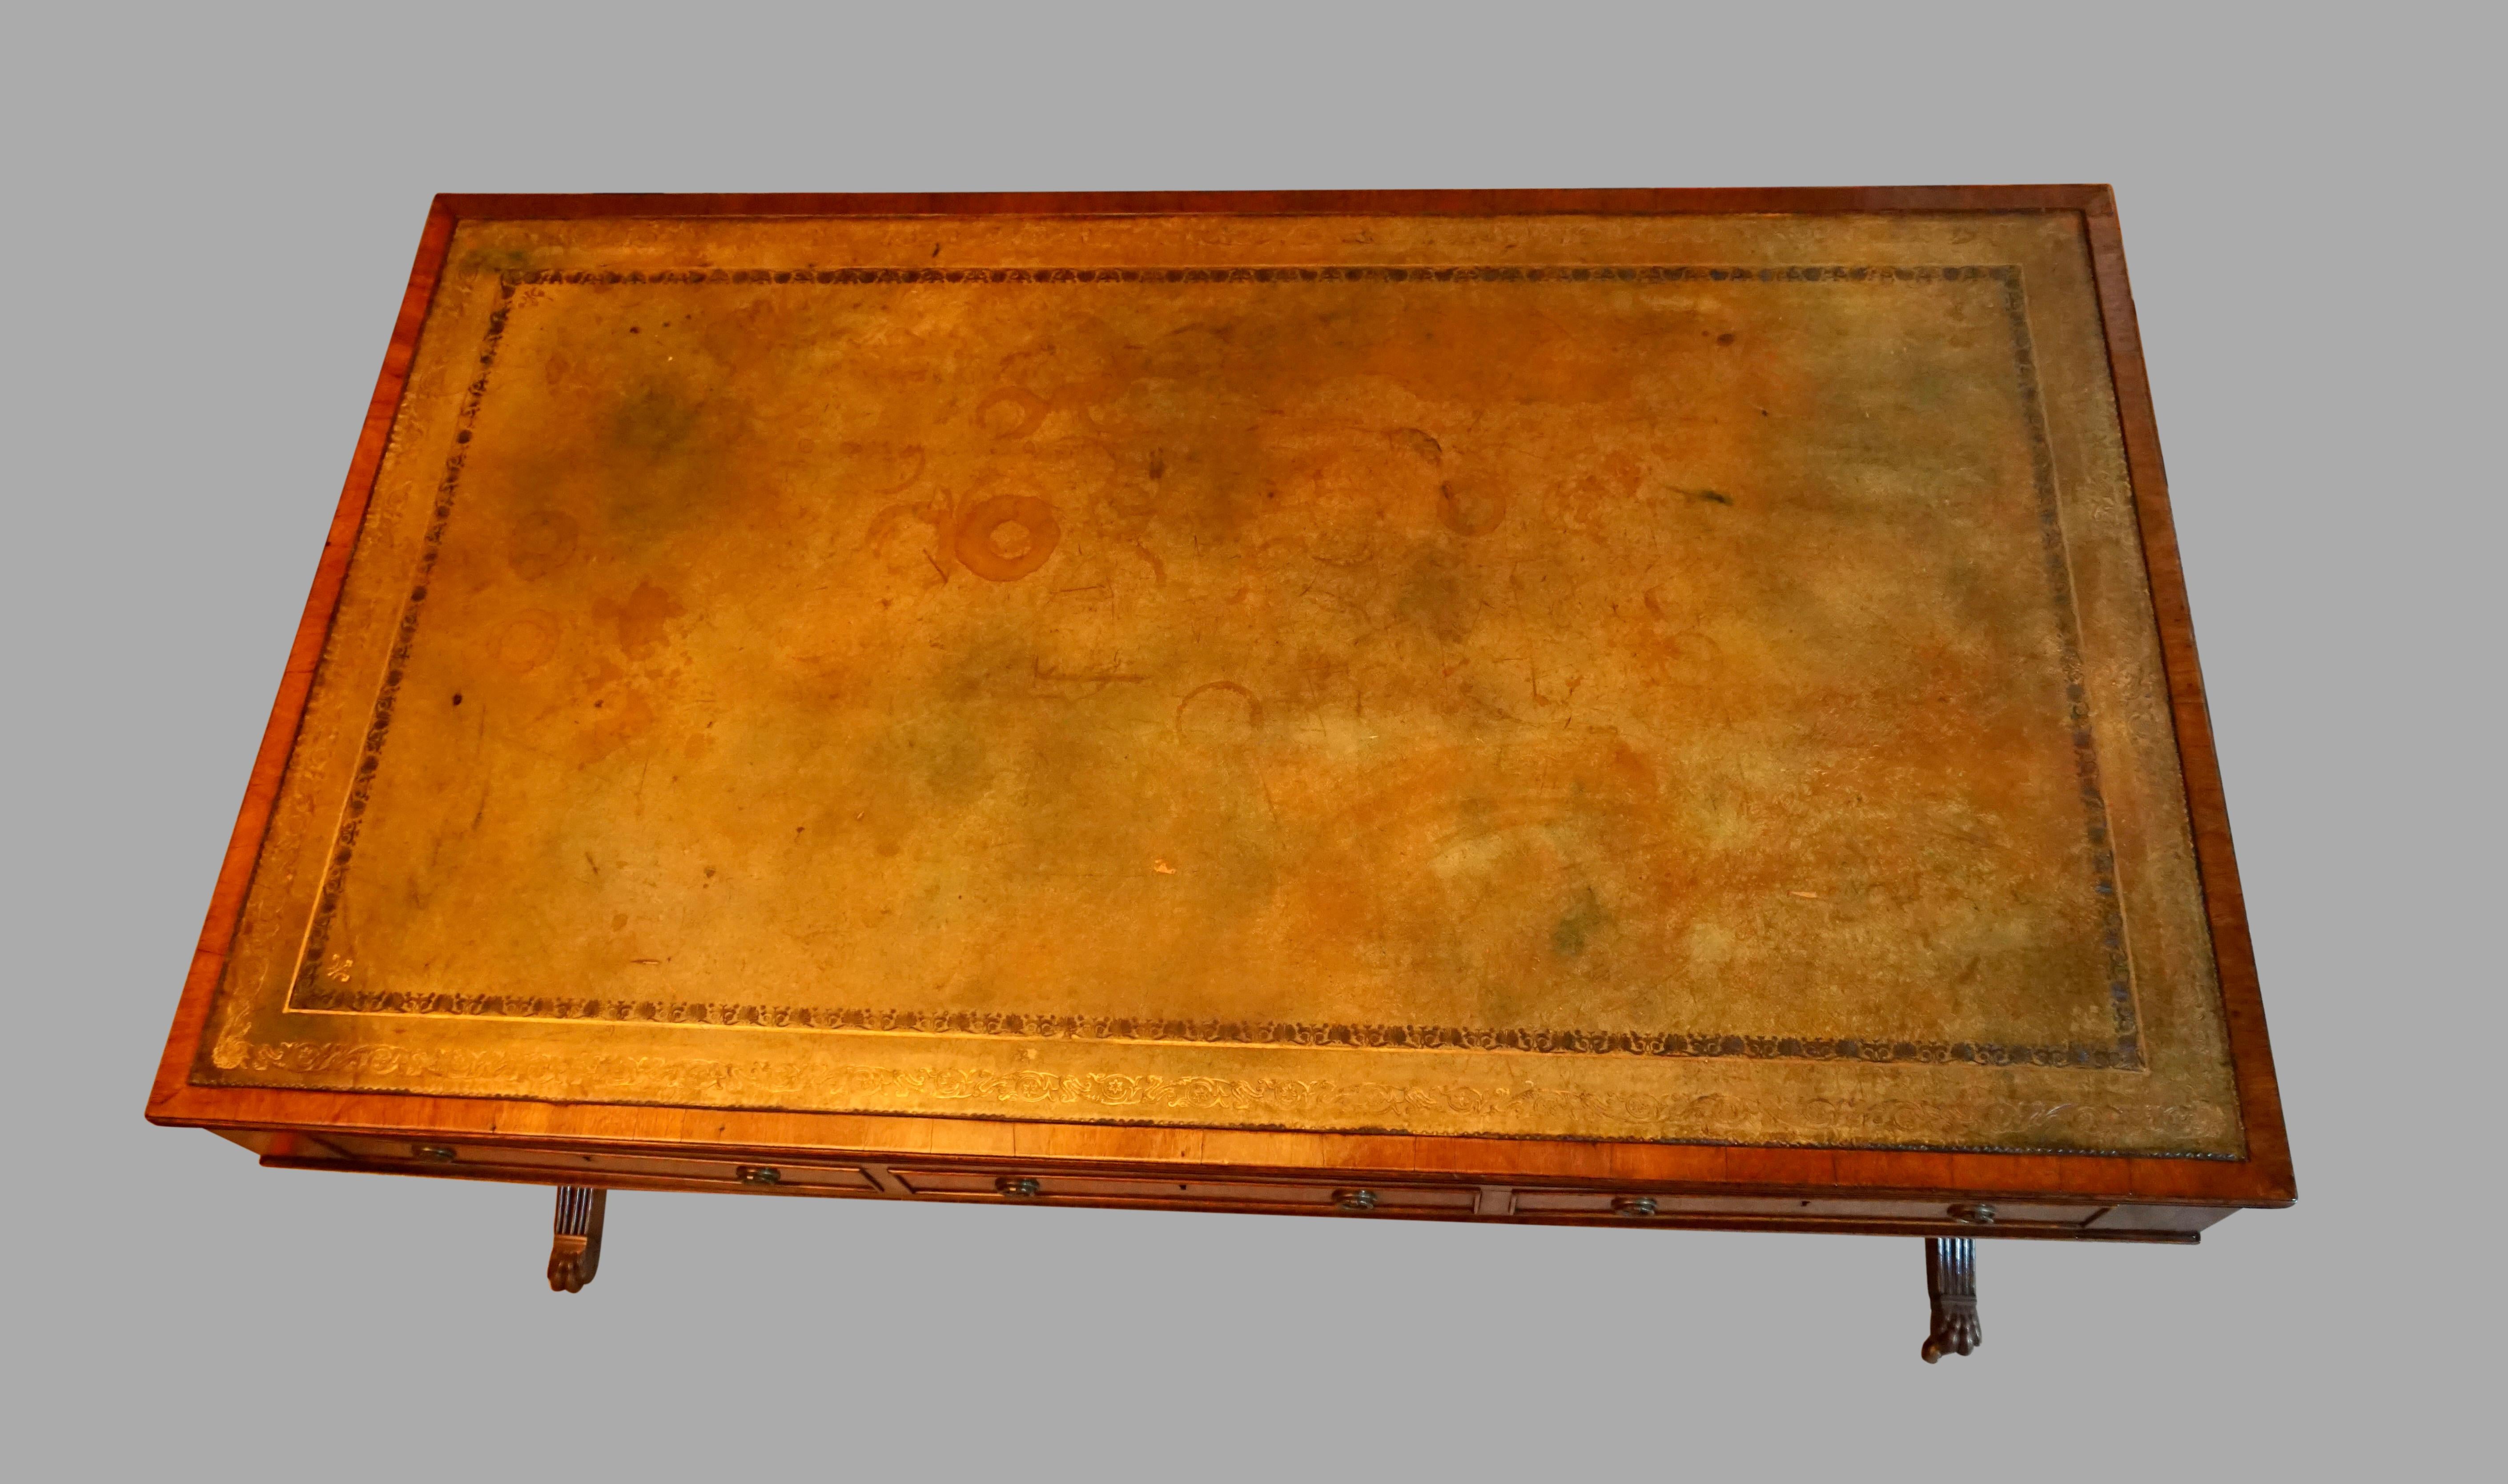 English Regency Style Mahogany Writing Table with Gilt-Tooled Leather Top For Sale 1